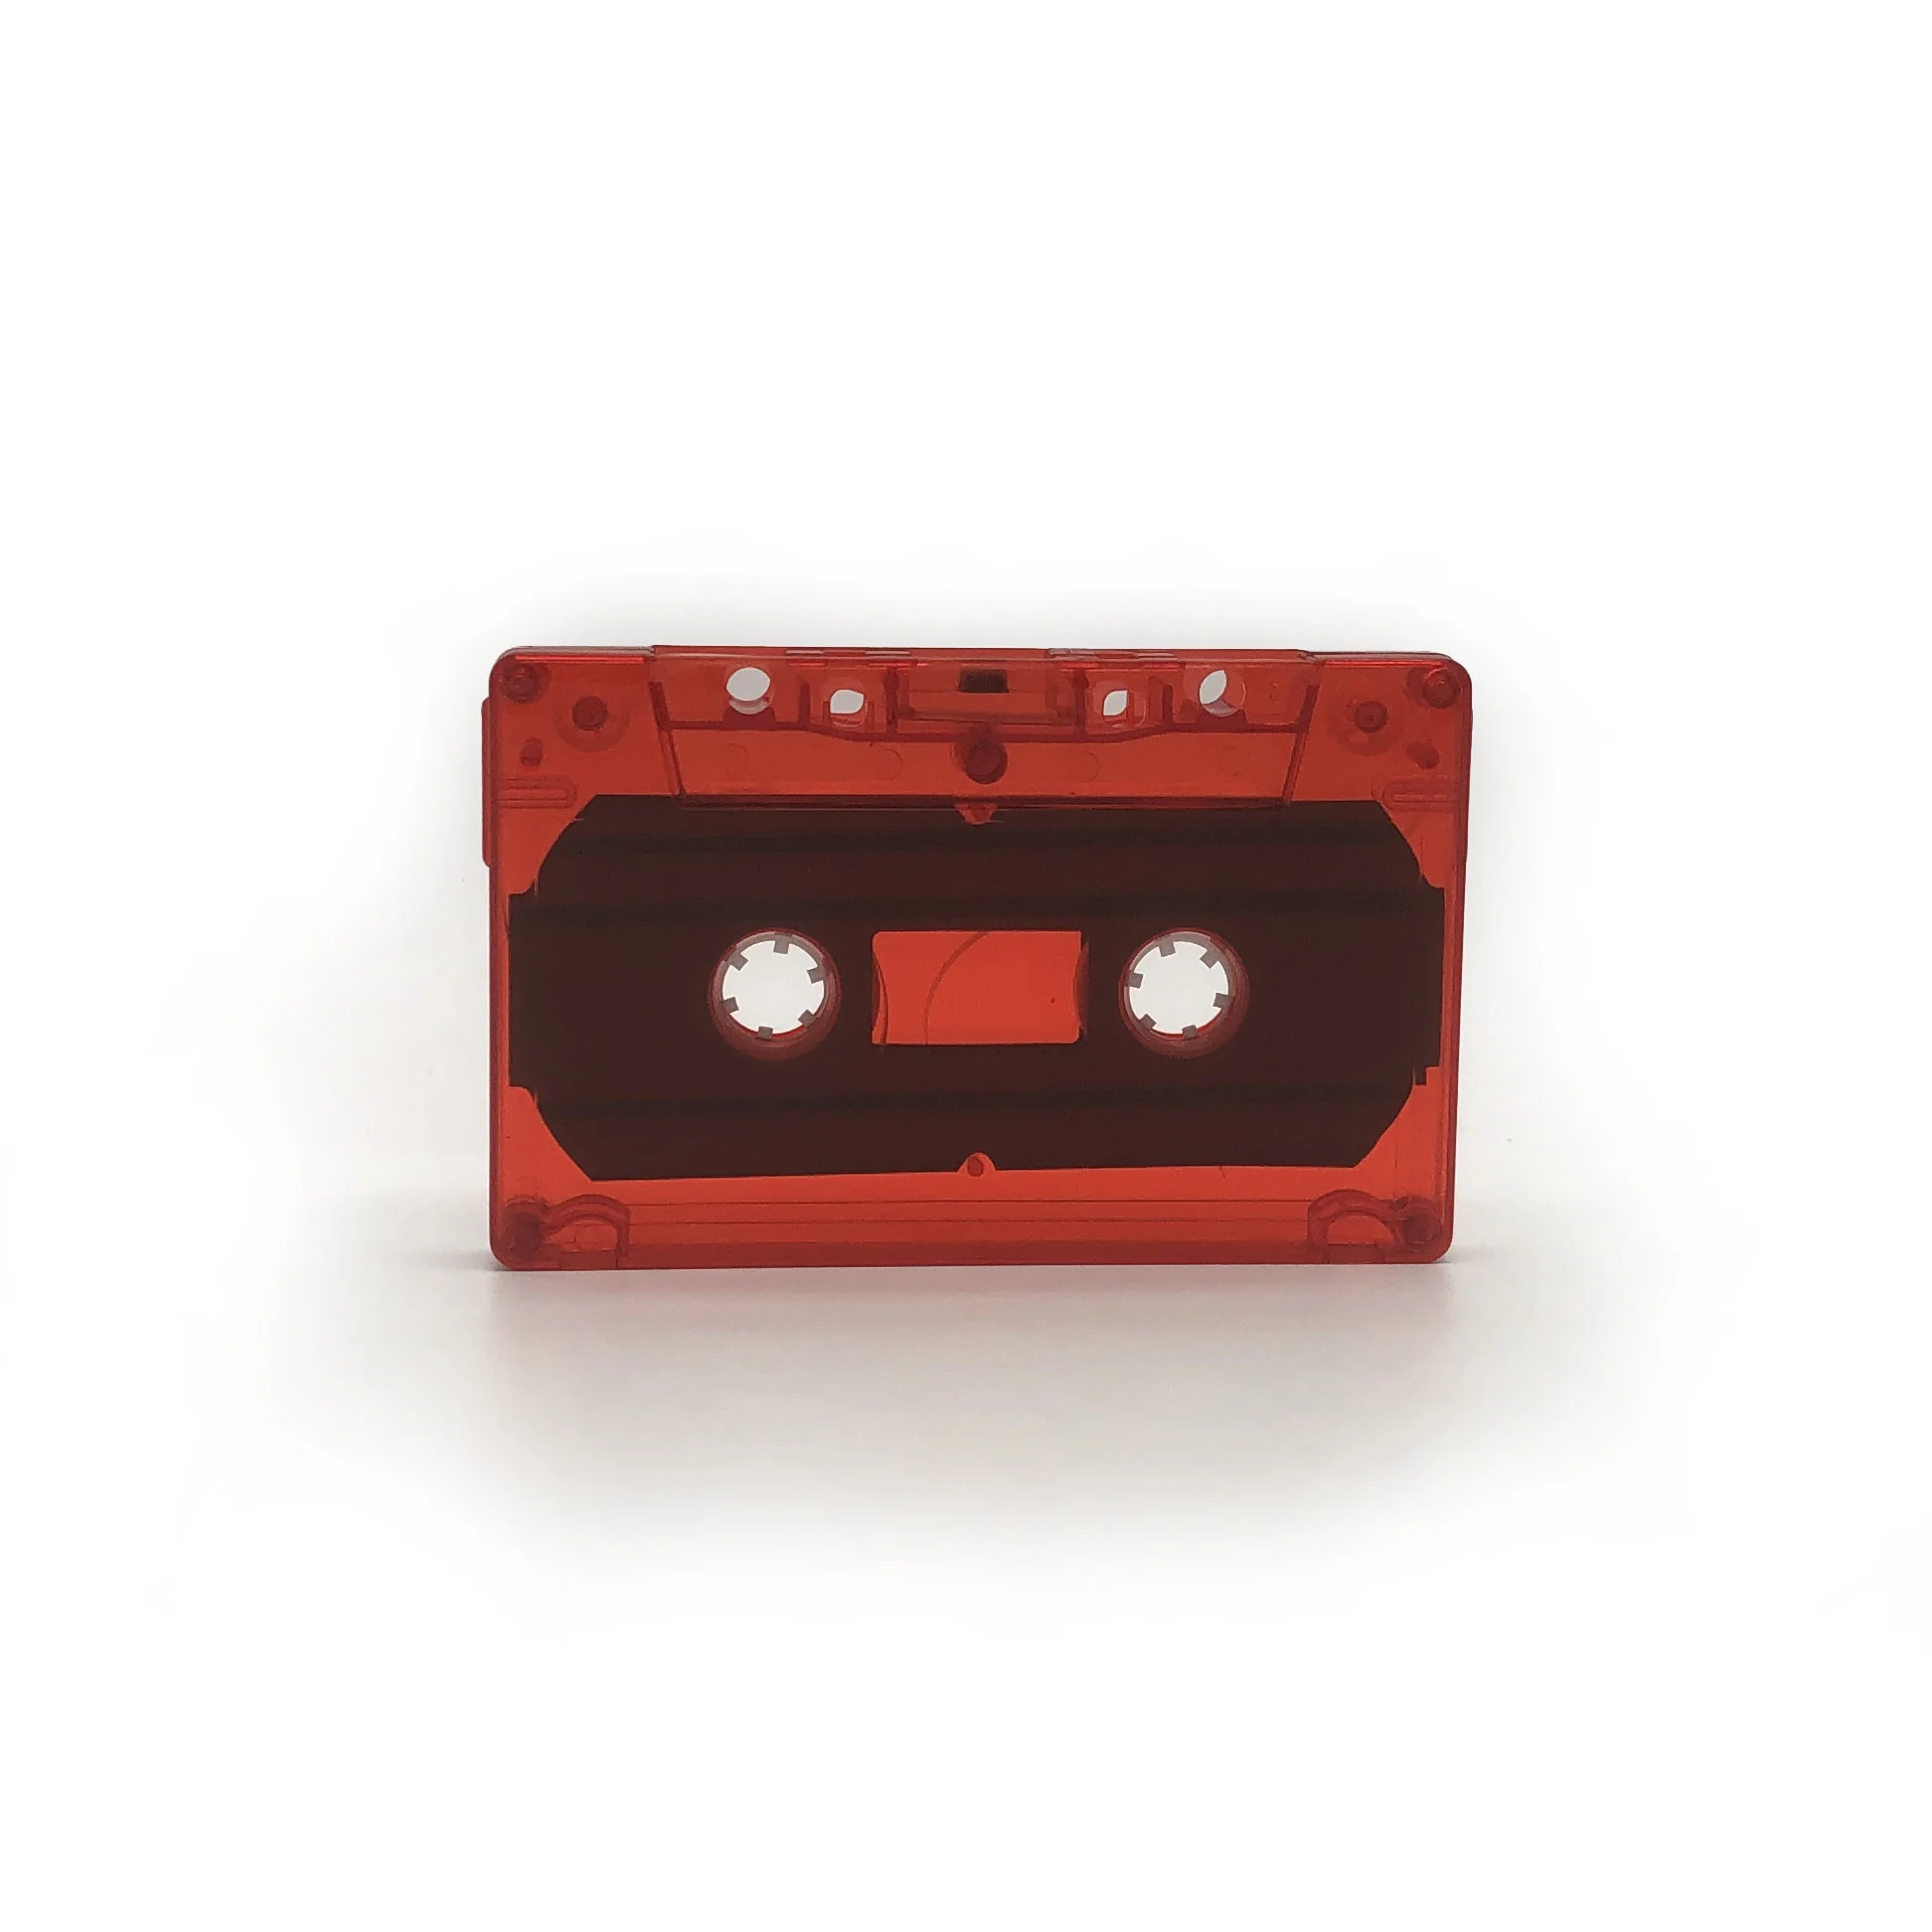 Manufacturing Transparent Blank wholesale custom manufacturing crystal case Cassette Tape